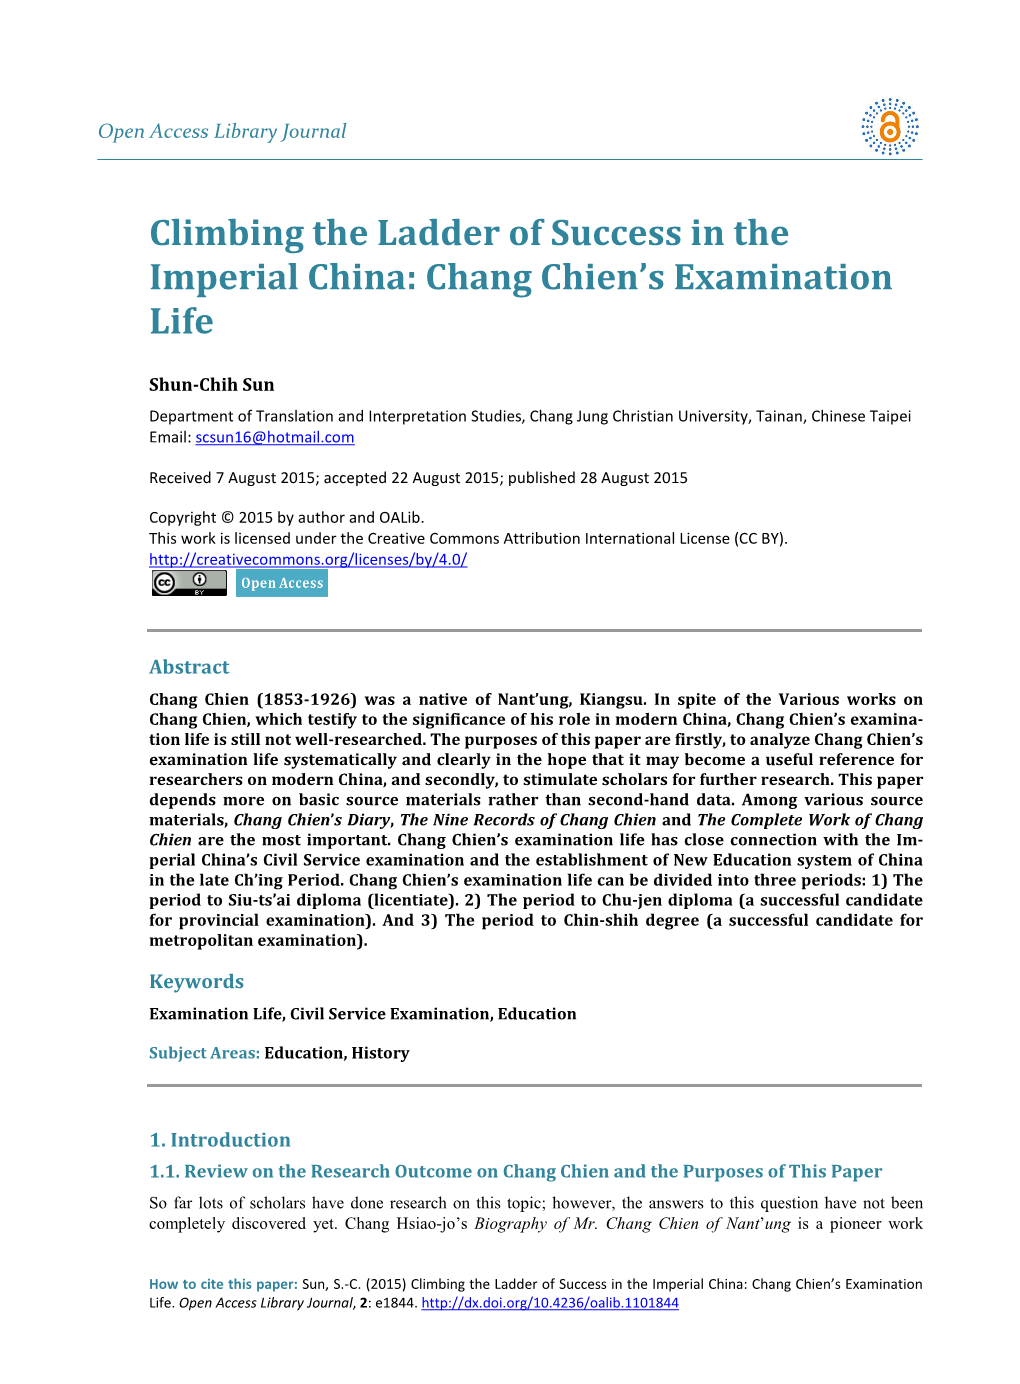 Climbing the Ladder of Success in the Imperial China: Chang Chien's